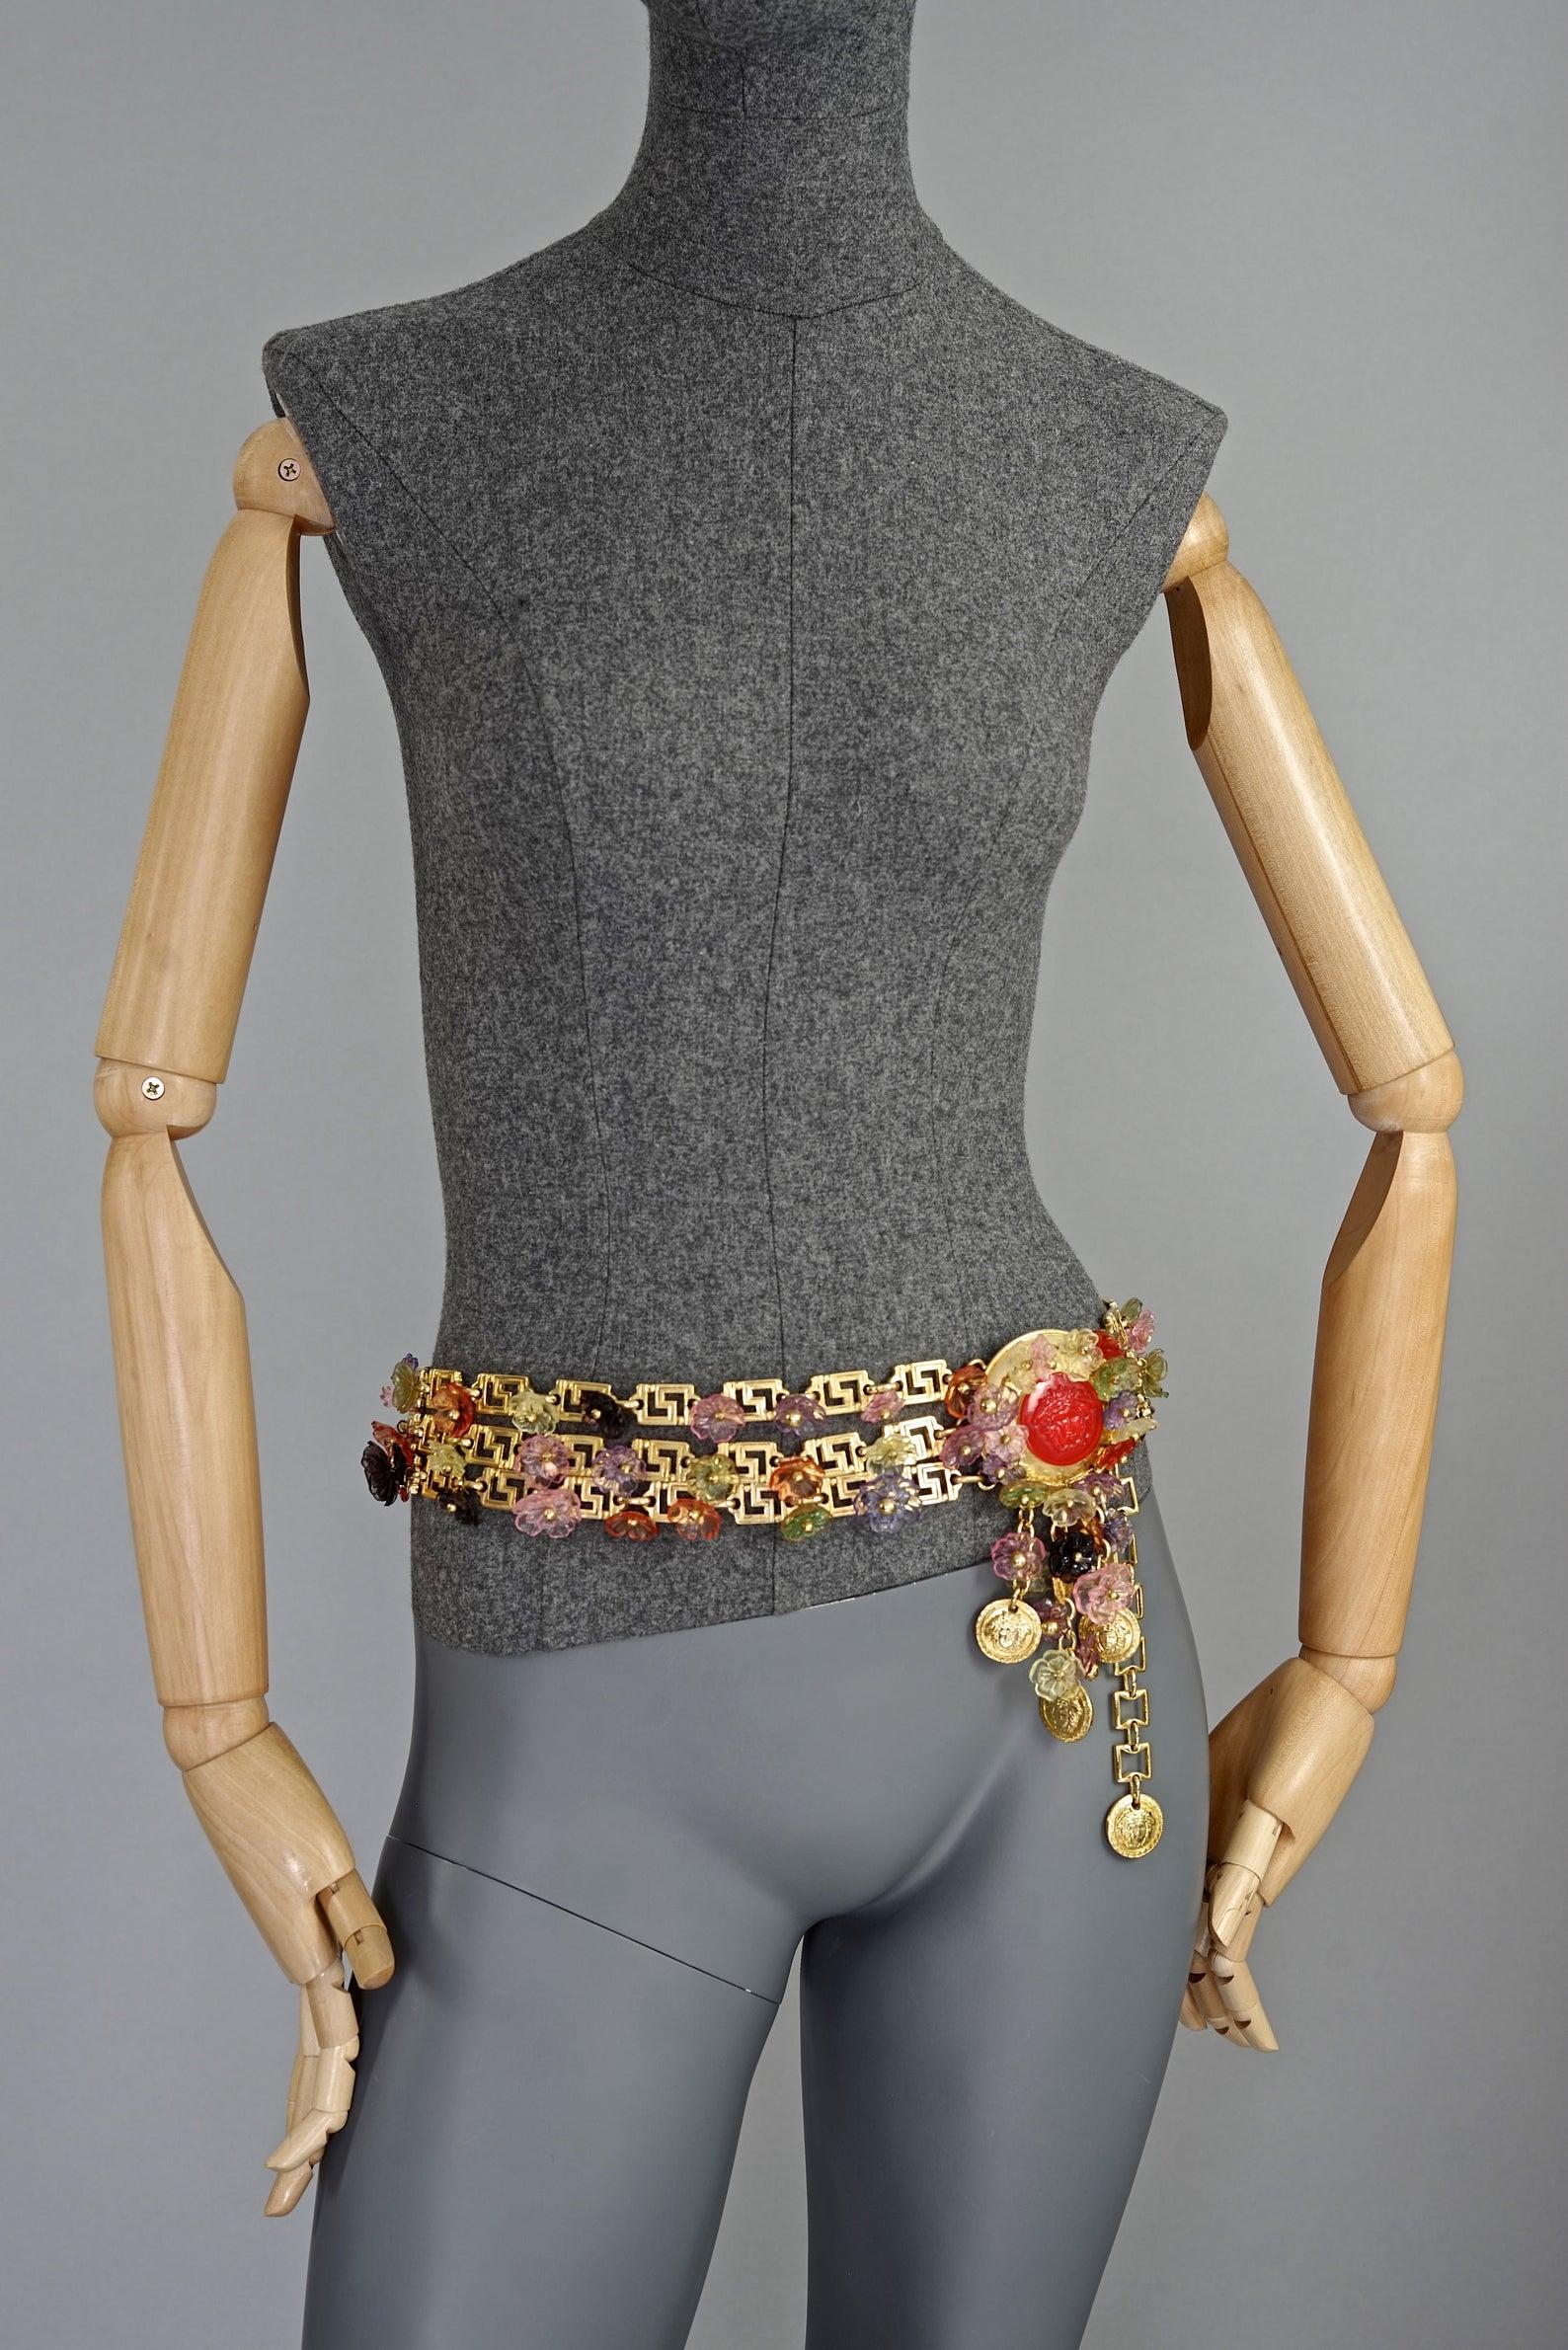 A rare collectors' piece from GIANNI VERSACE 1993 Spring/ Summer collection.

Features:
- 100% Authentic GIANNI VERSACE.
- Colourful flowers in resin, Medusa heads and greek keys tiered chain.
- Signed GIANNI VERSACE Made in Italy.
- Excellent